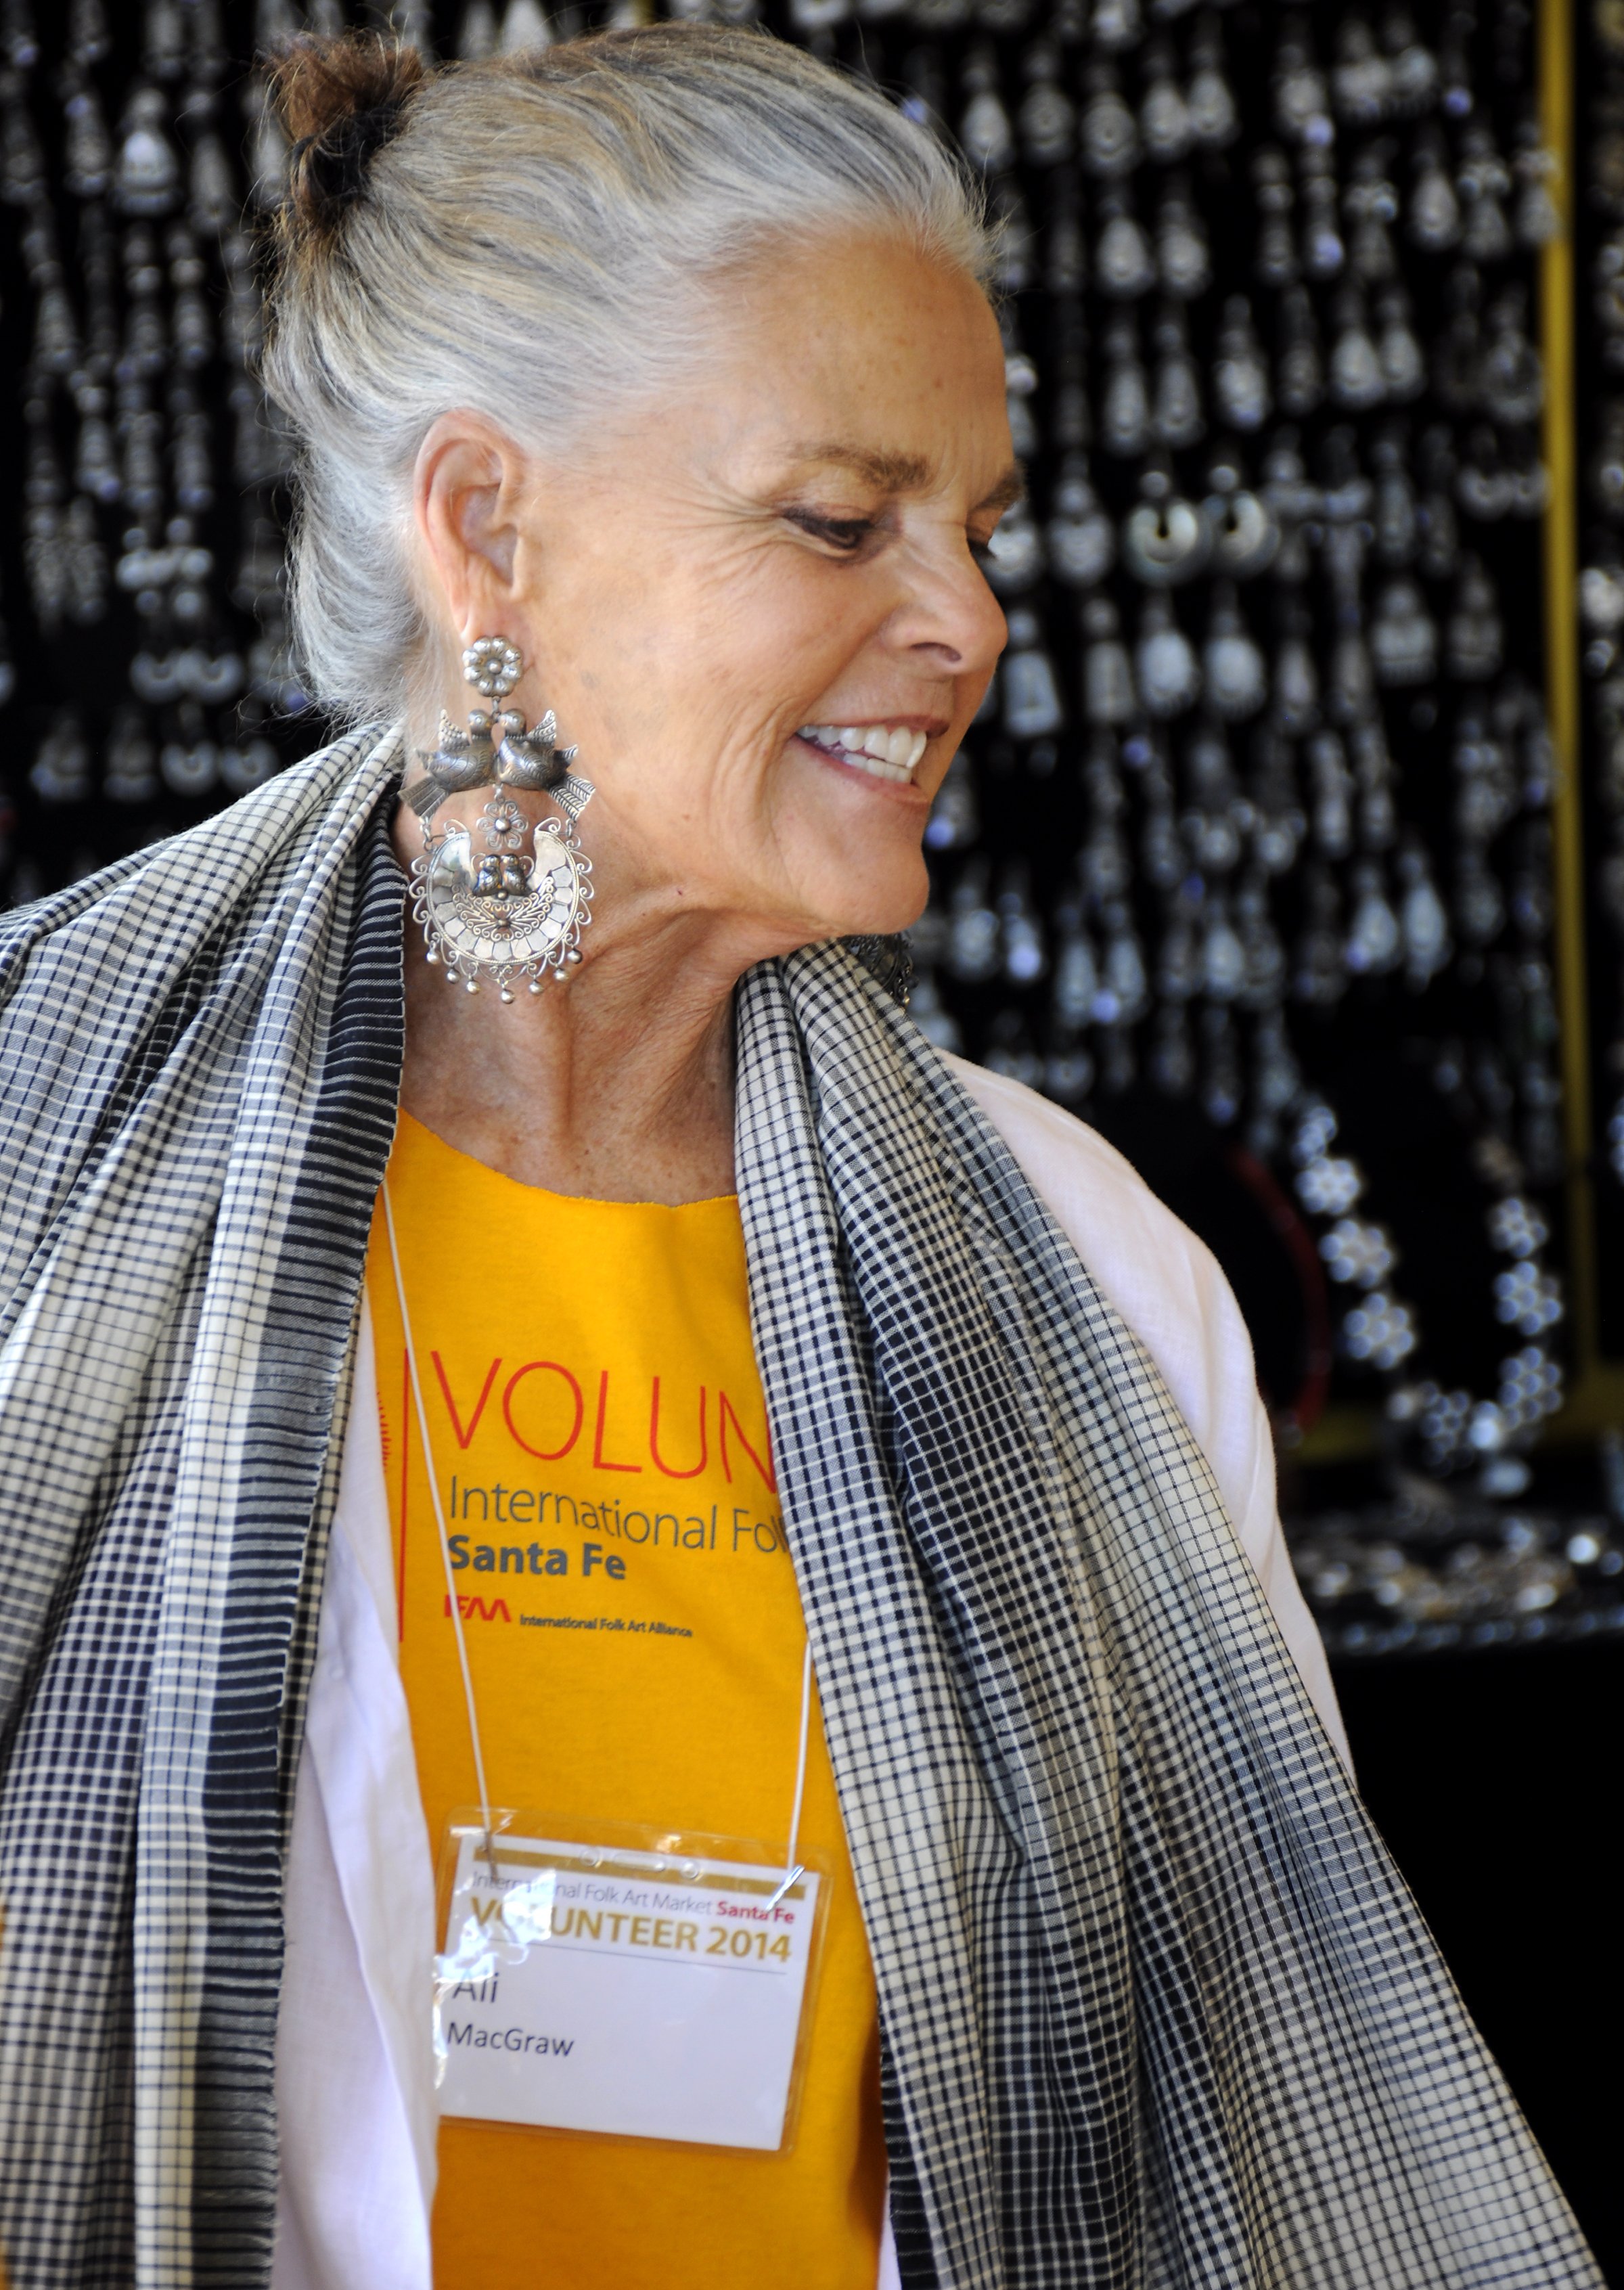 Ali MacGraw works as a volunteer at the annual International Folk Art Market on July 13, 2014, in Santa Fe, New Mexico | Source: Getty Images